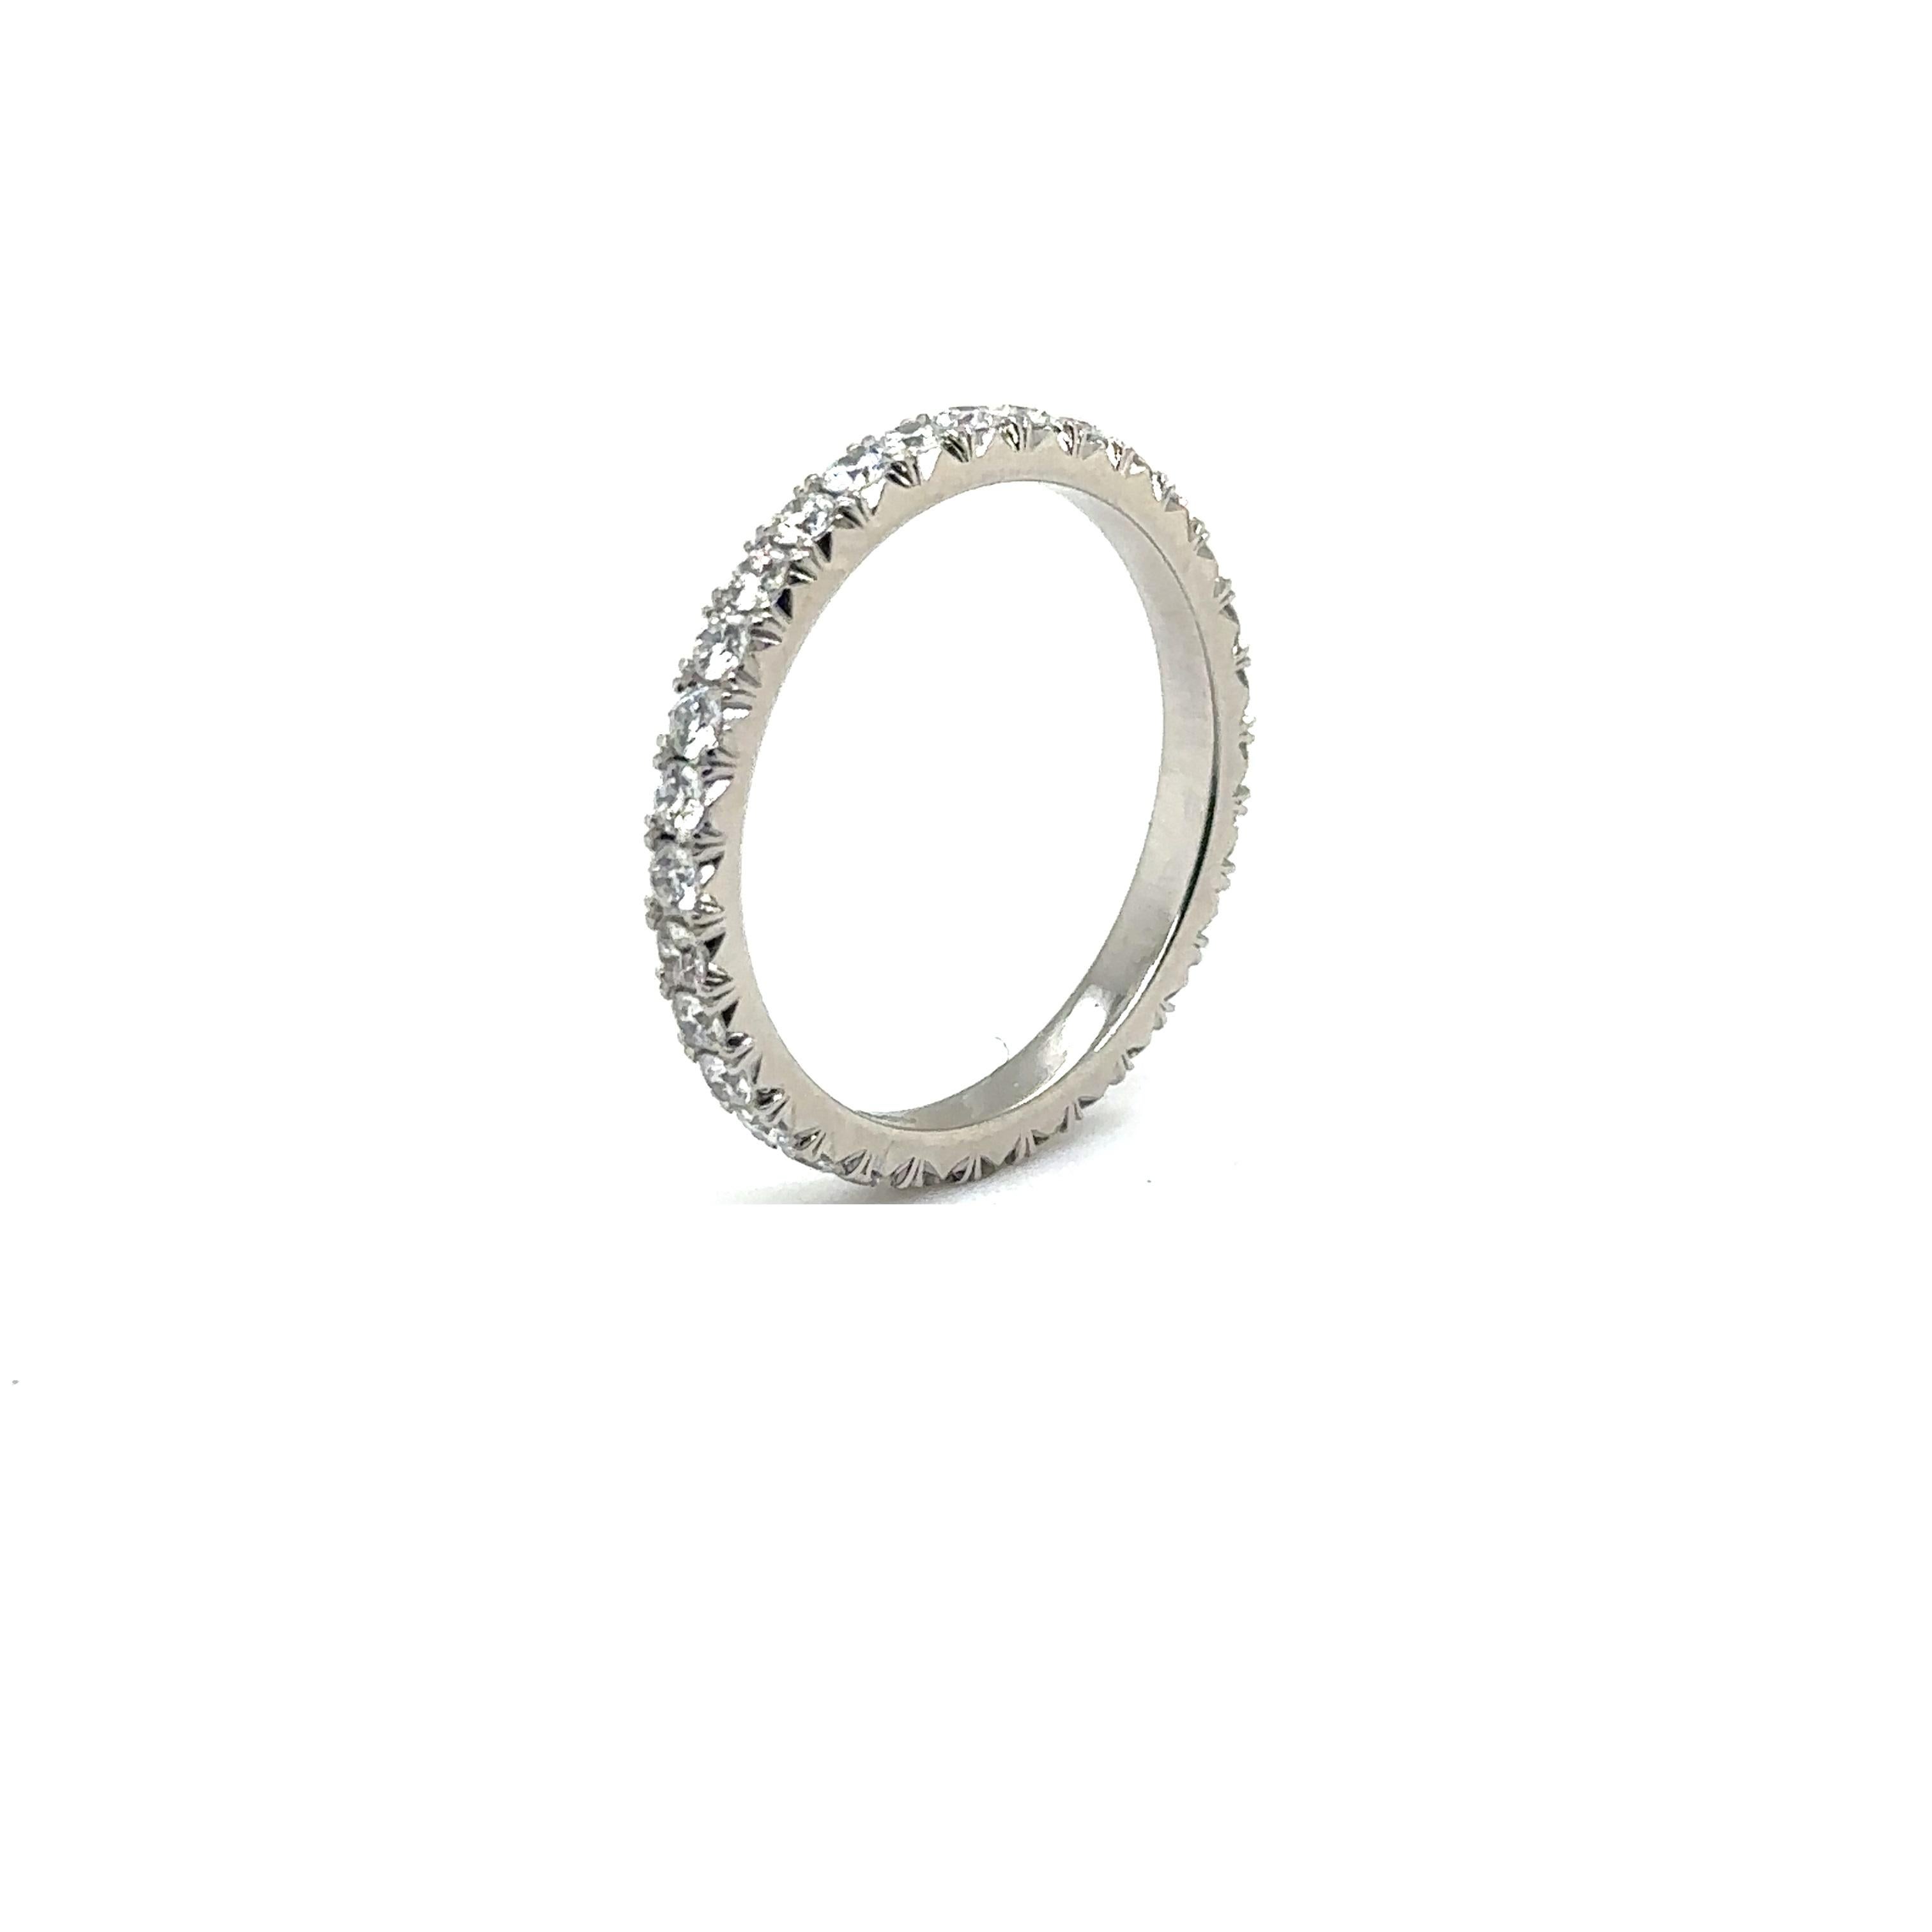 PLATINUM WEDDING BAND with 0.68 CWT DIAMONDS
Metal: Platinum
Diamond Info: 
31 - G/VS ROUND BRILLIANT DIAMONDS
SETTING MICRO PAVE FISH TAIL
Total Ct Weight:  0.68 cwt.
Item Weight: 3.06 gm
Ring Size: 6 ¼ (Can be sized up to 6 ½)
Measurements: 2.25